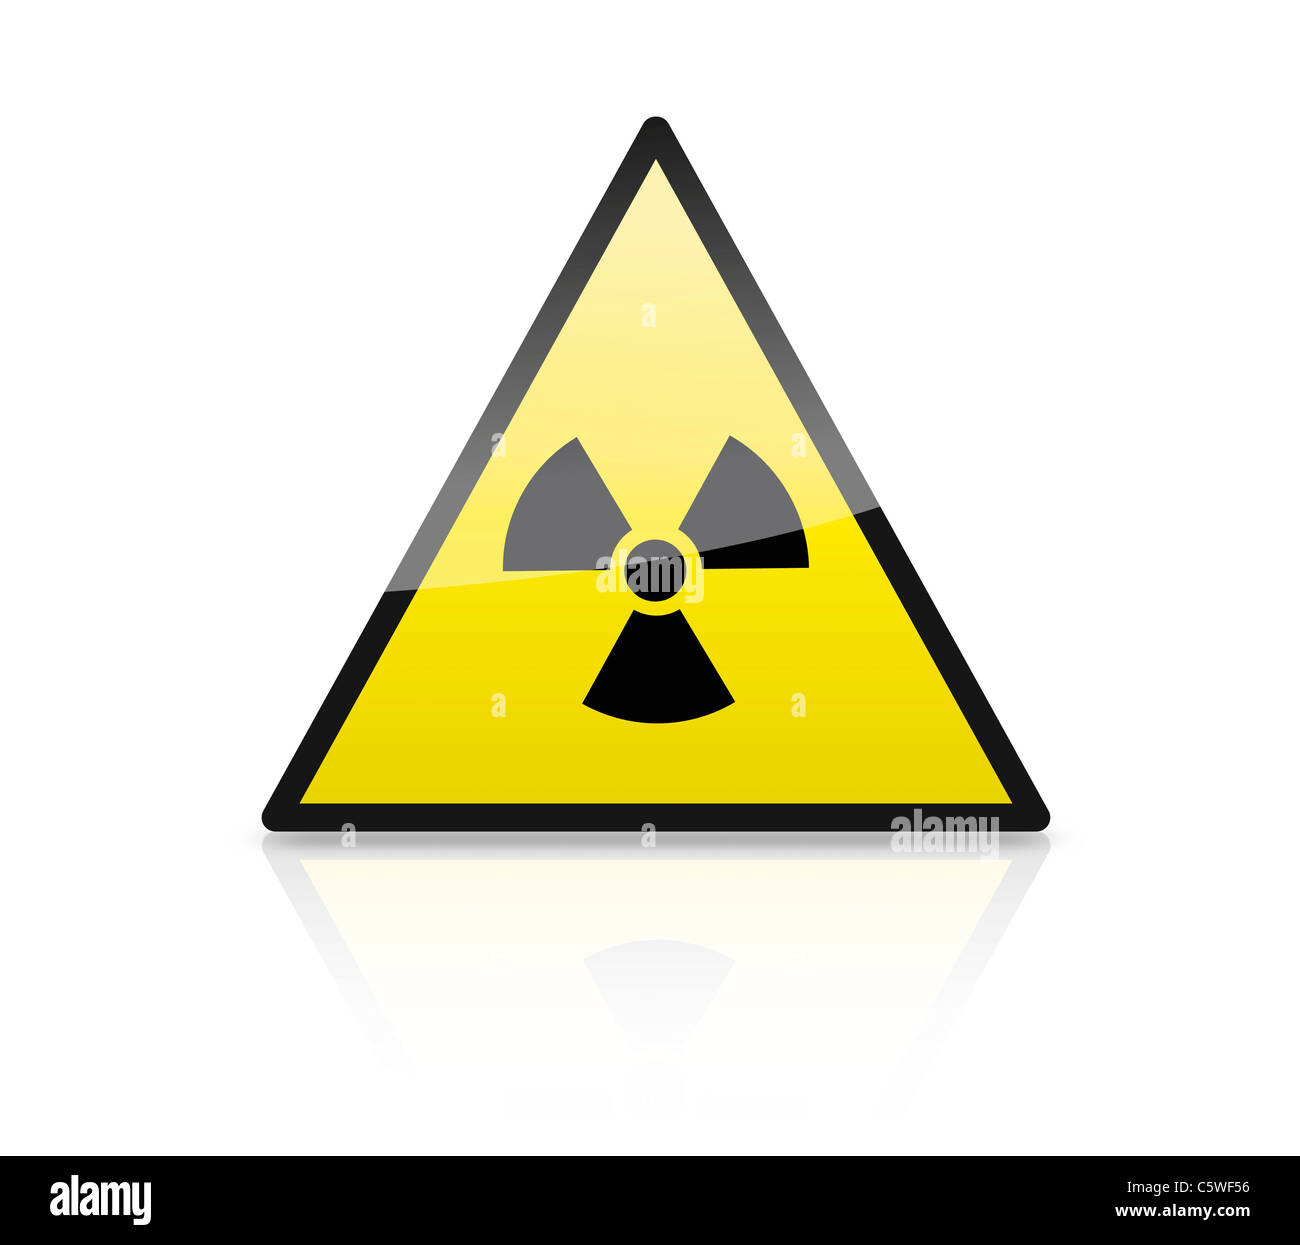 Close up of illustration of atom sign on triangle Stock Photo